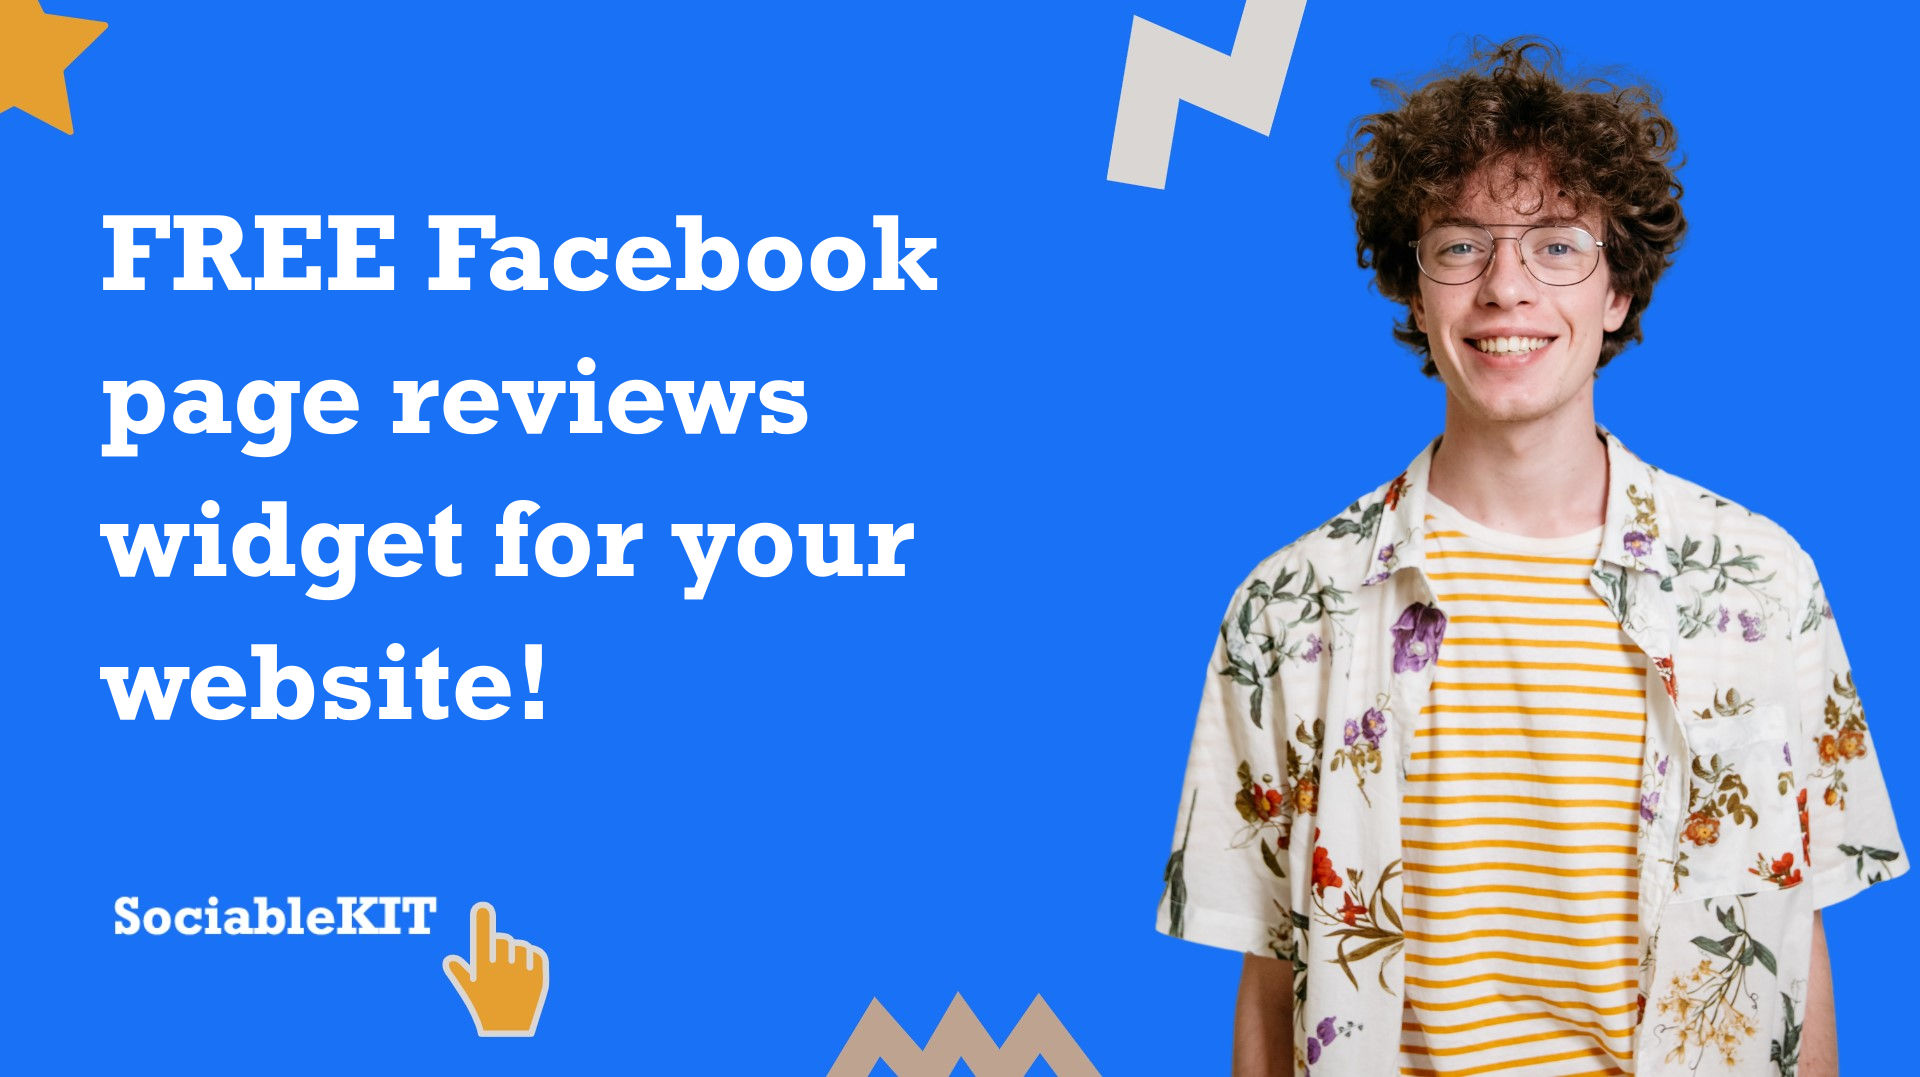 Free Facebook page reviews widget for your website